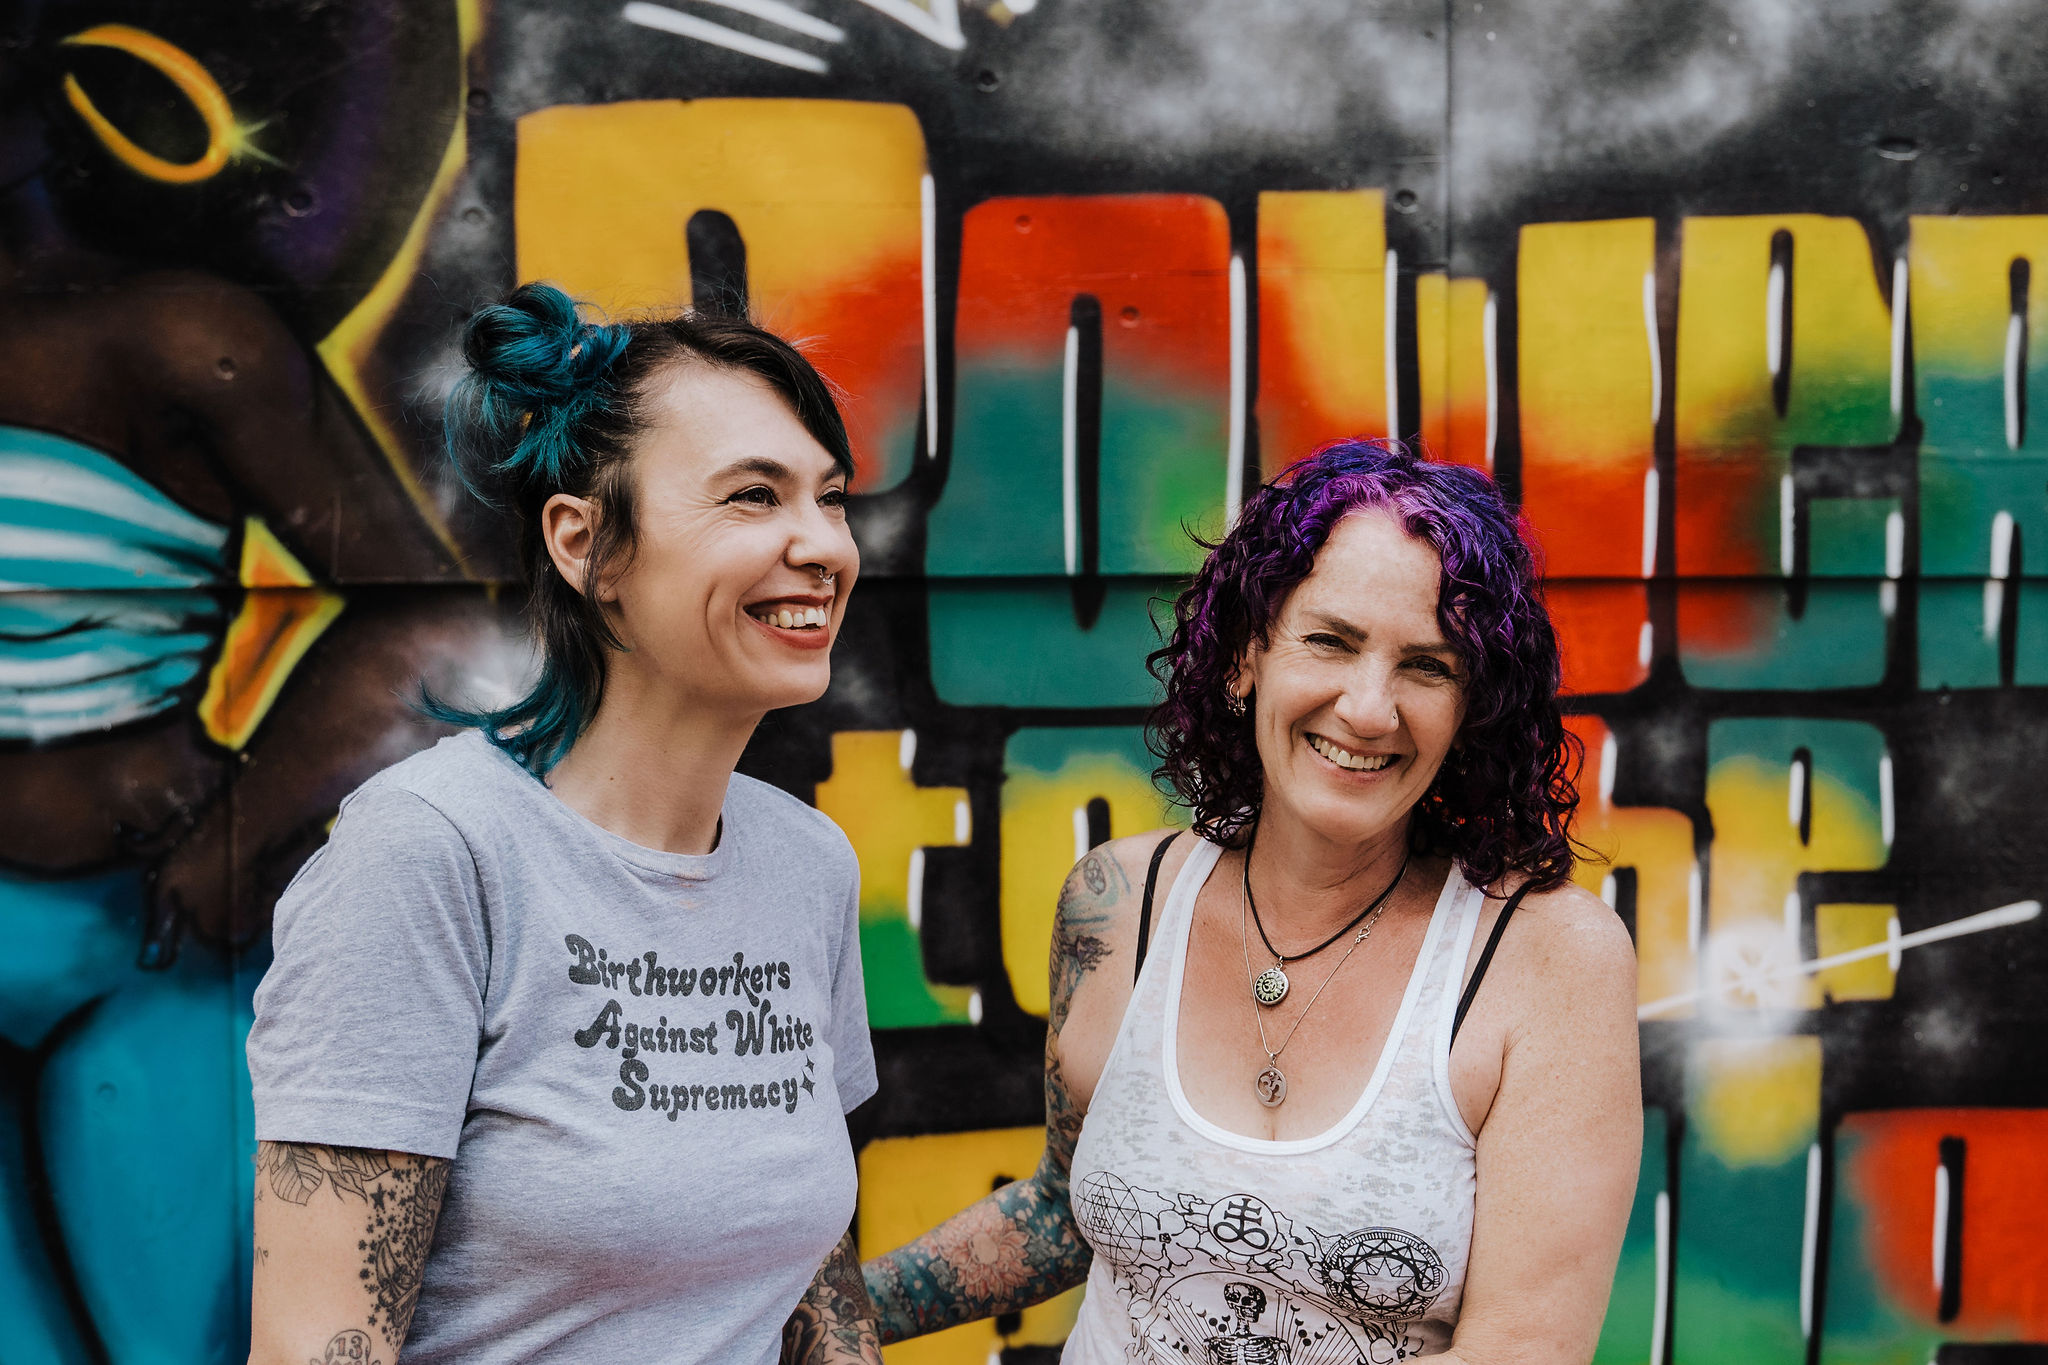 Nickie and Juli Tilsner stand in front of a colorful mural that says &quot;Power to the people&quot;. They are smiling, Juli&#39;s hand is on Nickie&#39;s arm, and Nickie is looking to the right.